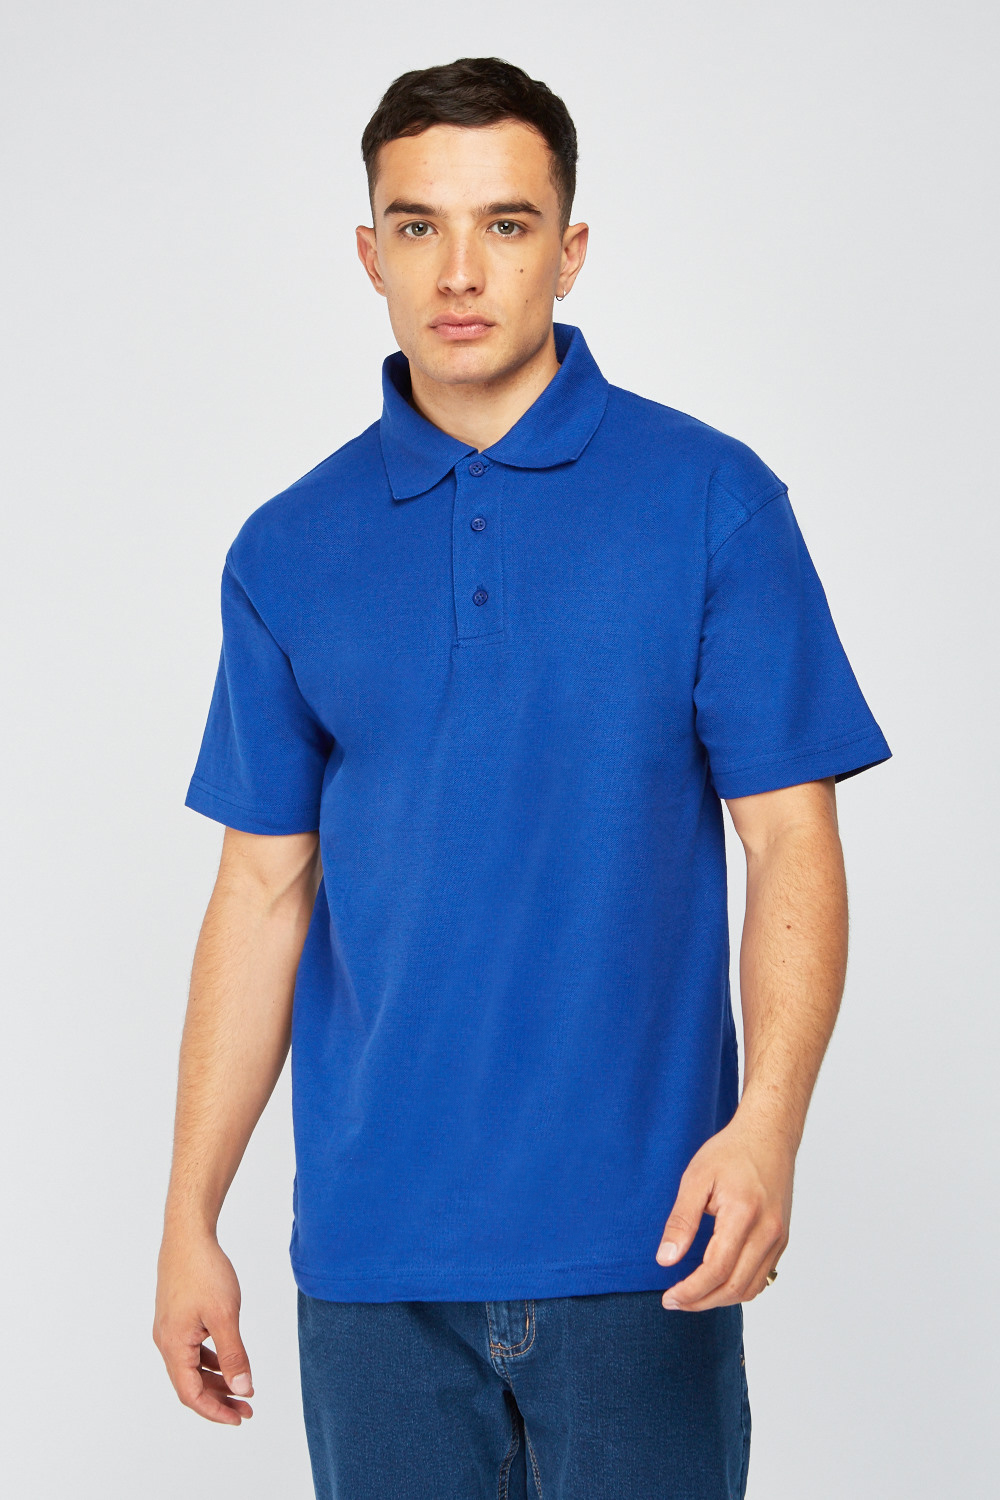 Pack Of 3 Royal Blue Polo Shirts - Just $7